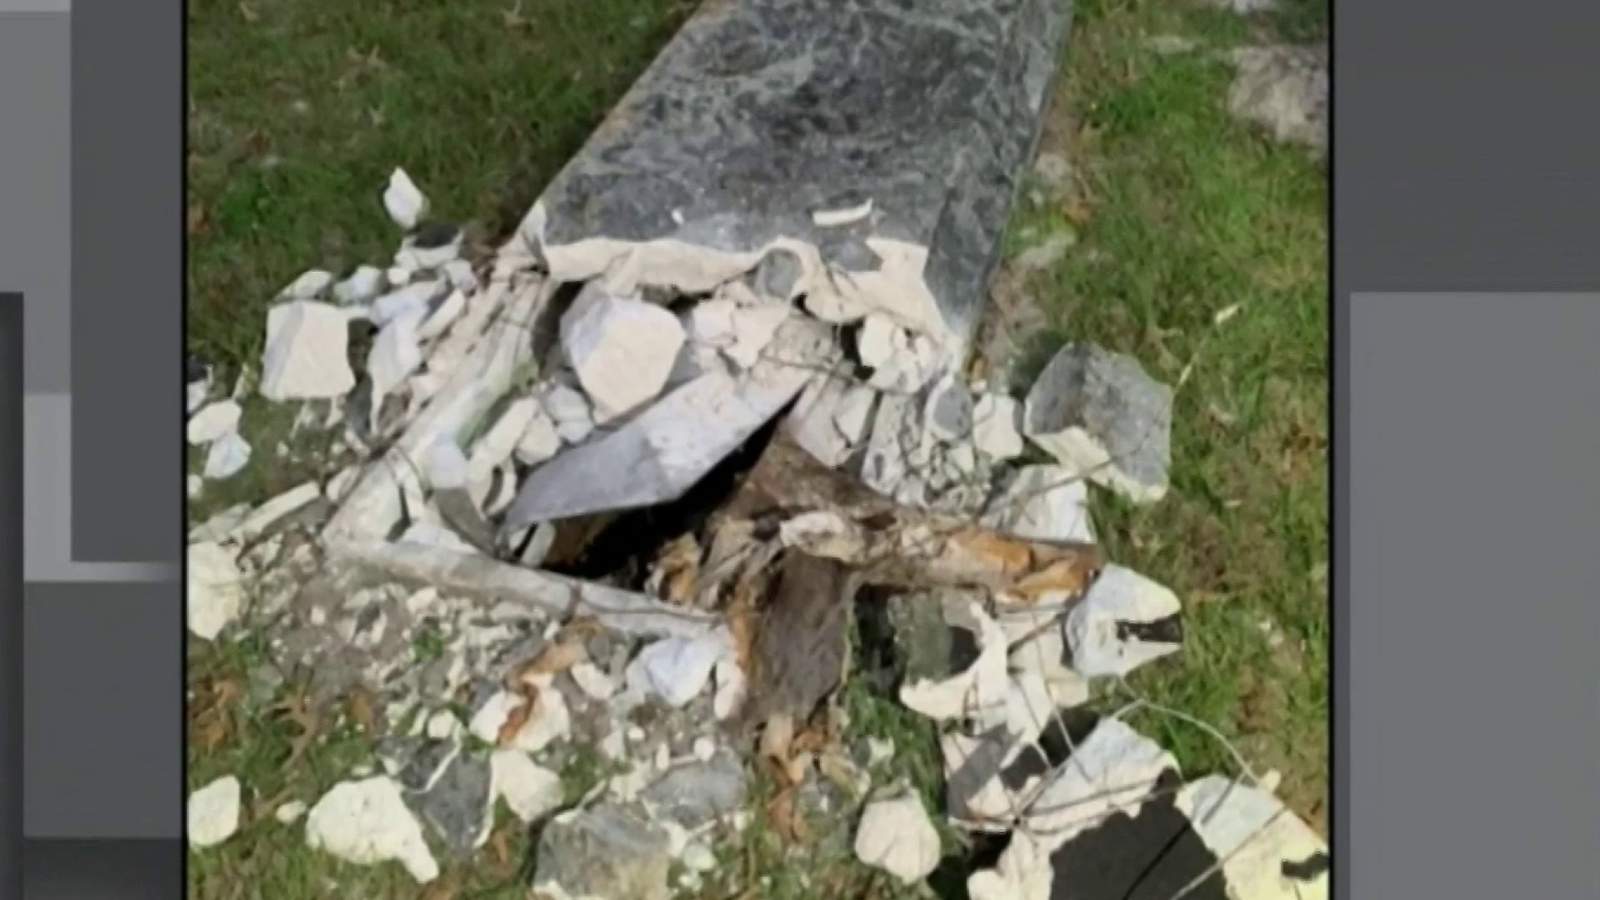 Human remains stolen from Mount Dora cemetery likely used in ritual